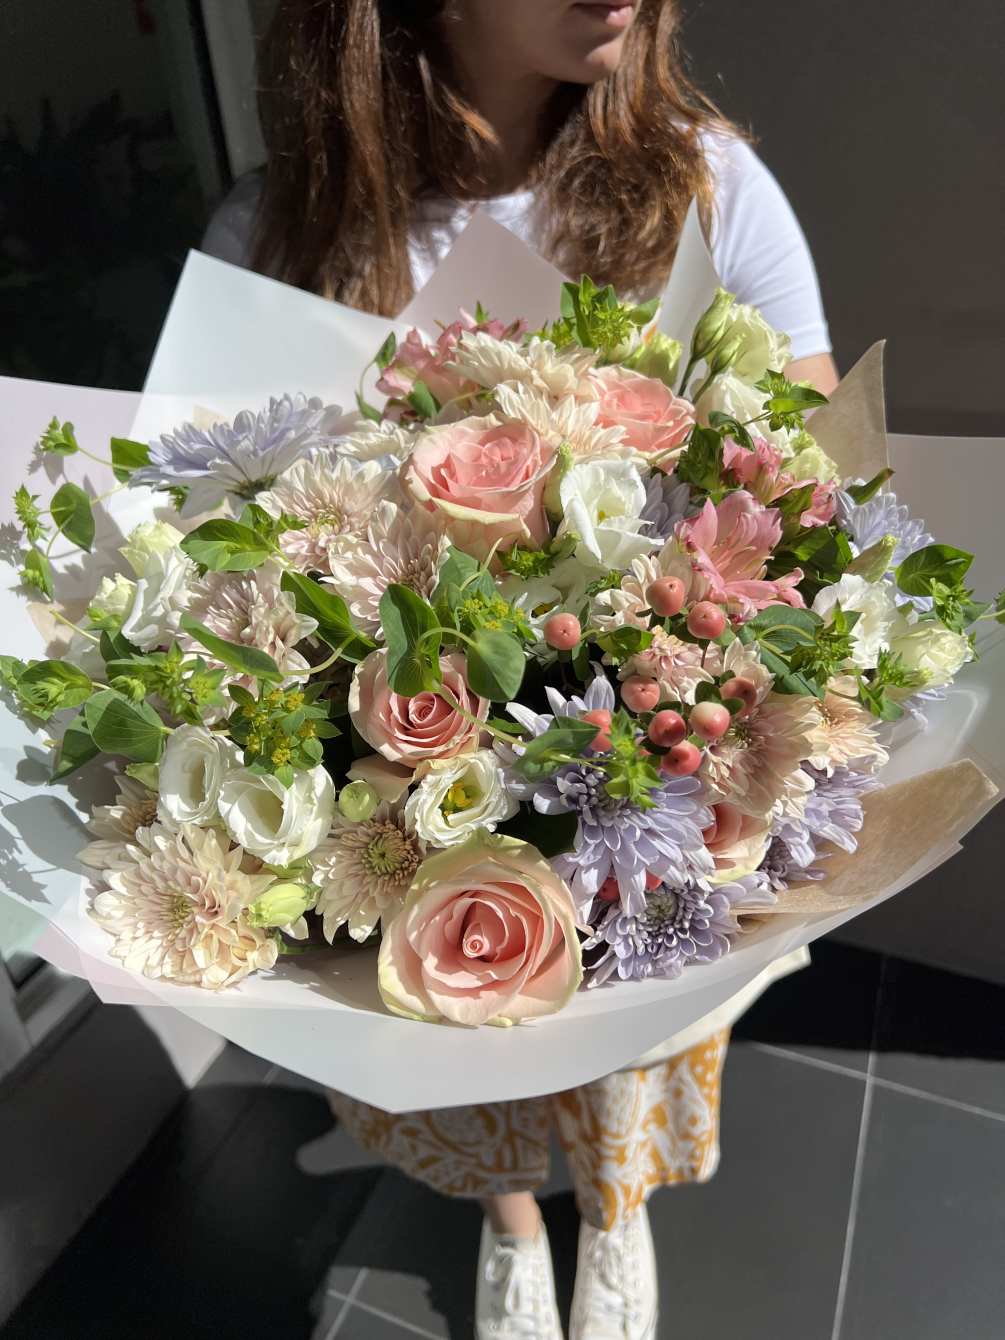 A handtied bouquet with soft pastel colors. With different flowers that&#039;ll be